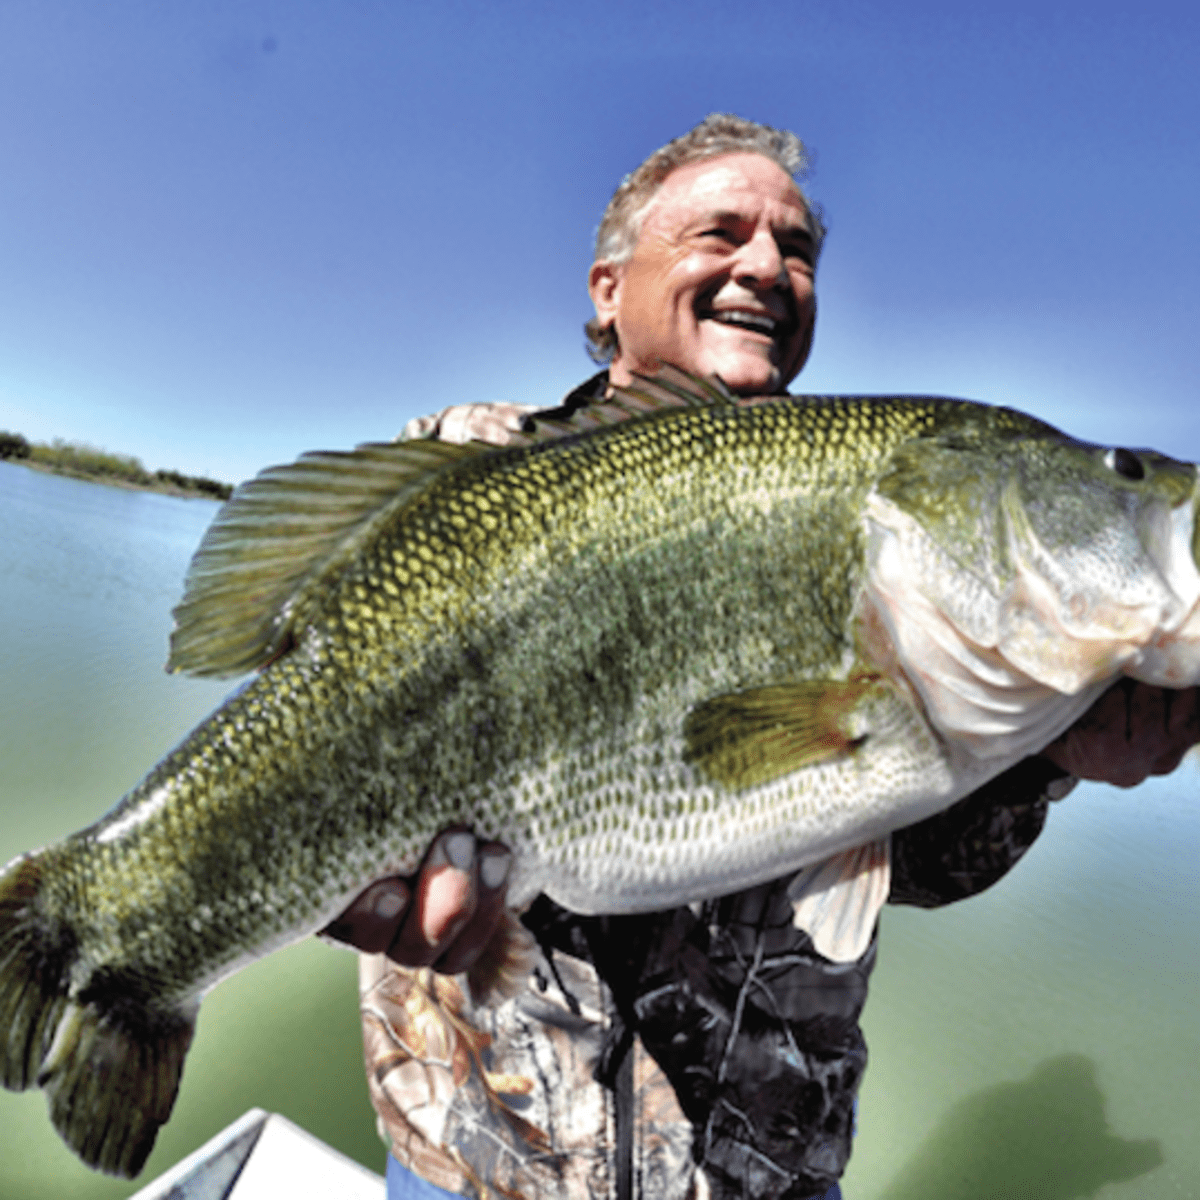 Big Largemouth Bass Shatters Angler's Fishing Rod, But He Still Lands It